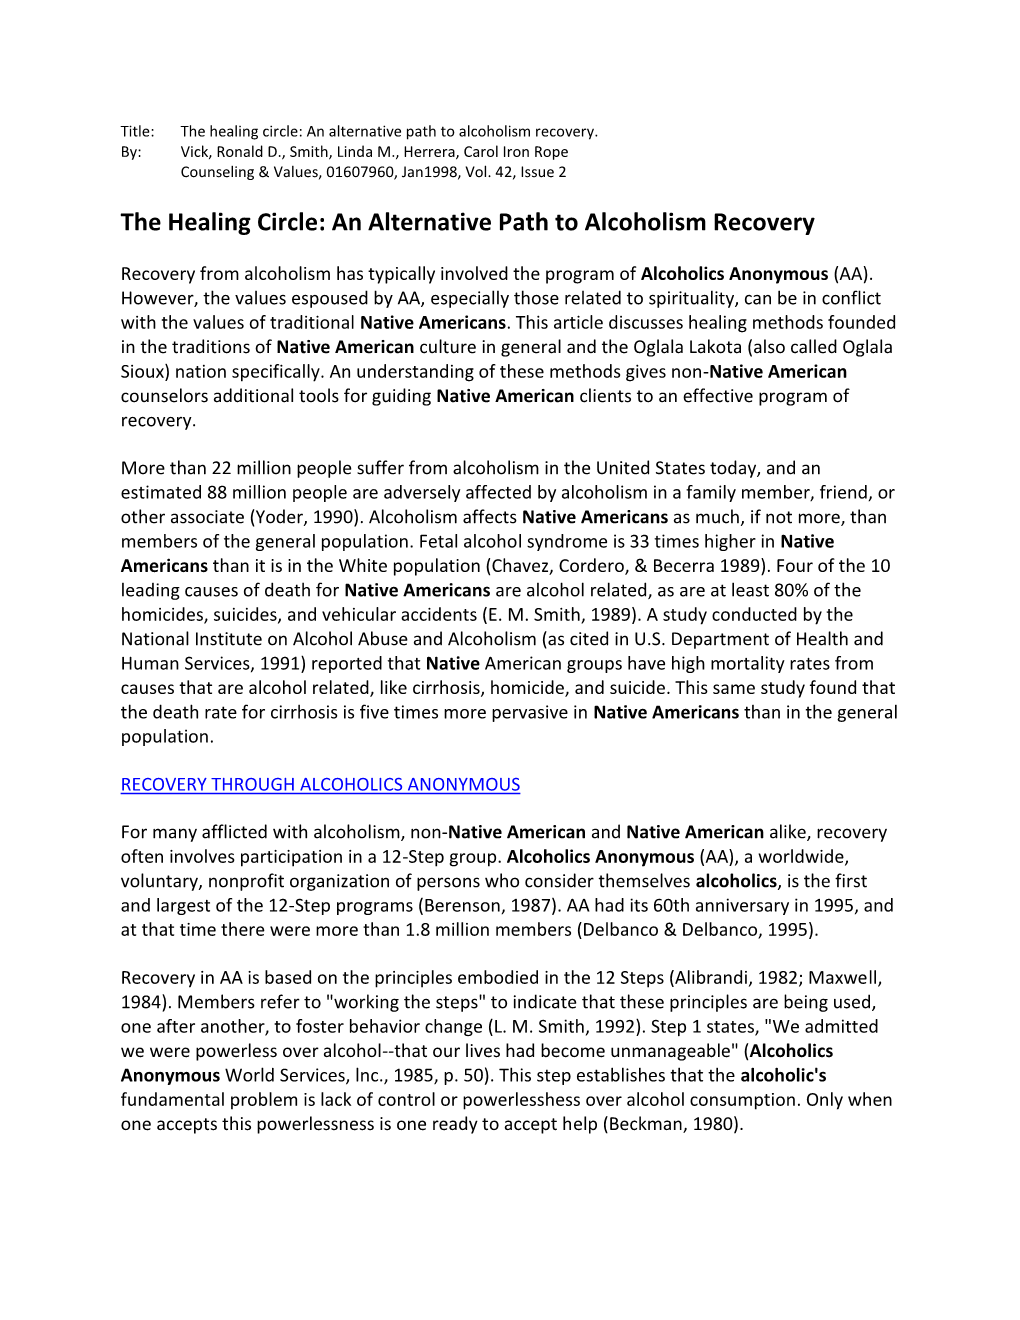 The Healing Circle: an Alternative Path to Alcoholism Recovery